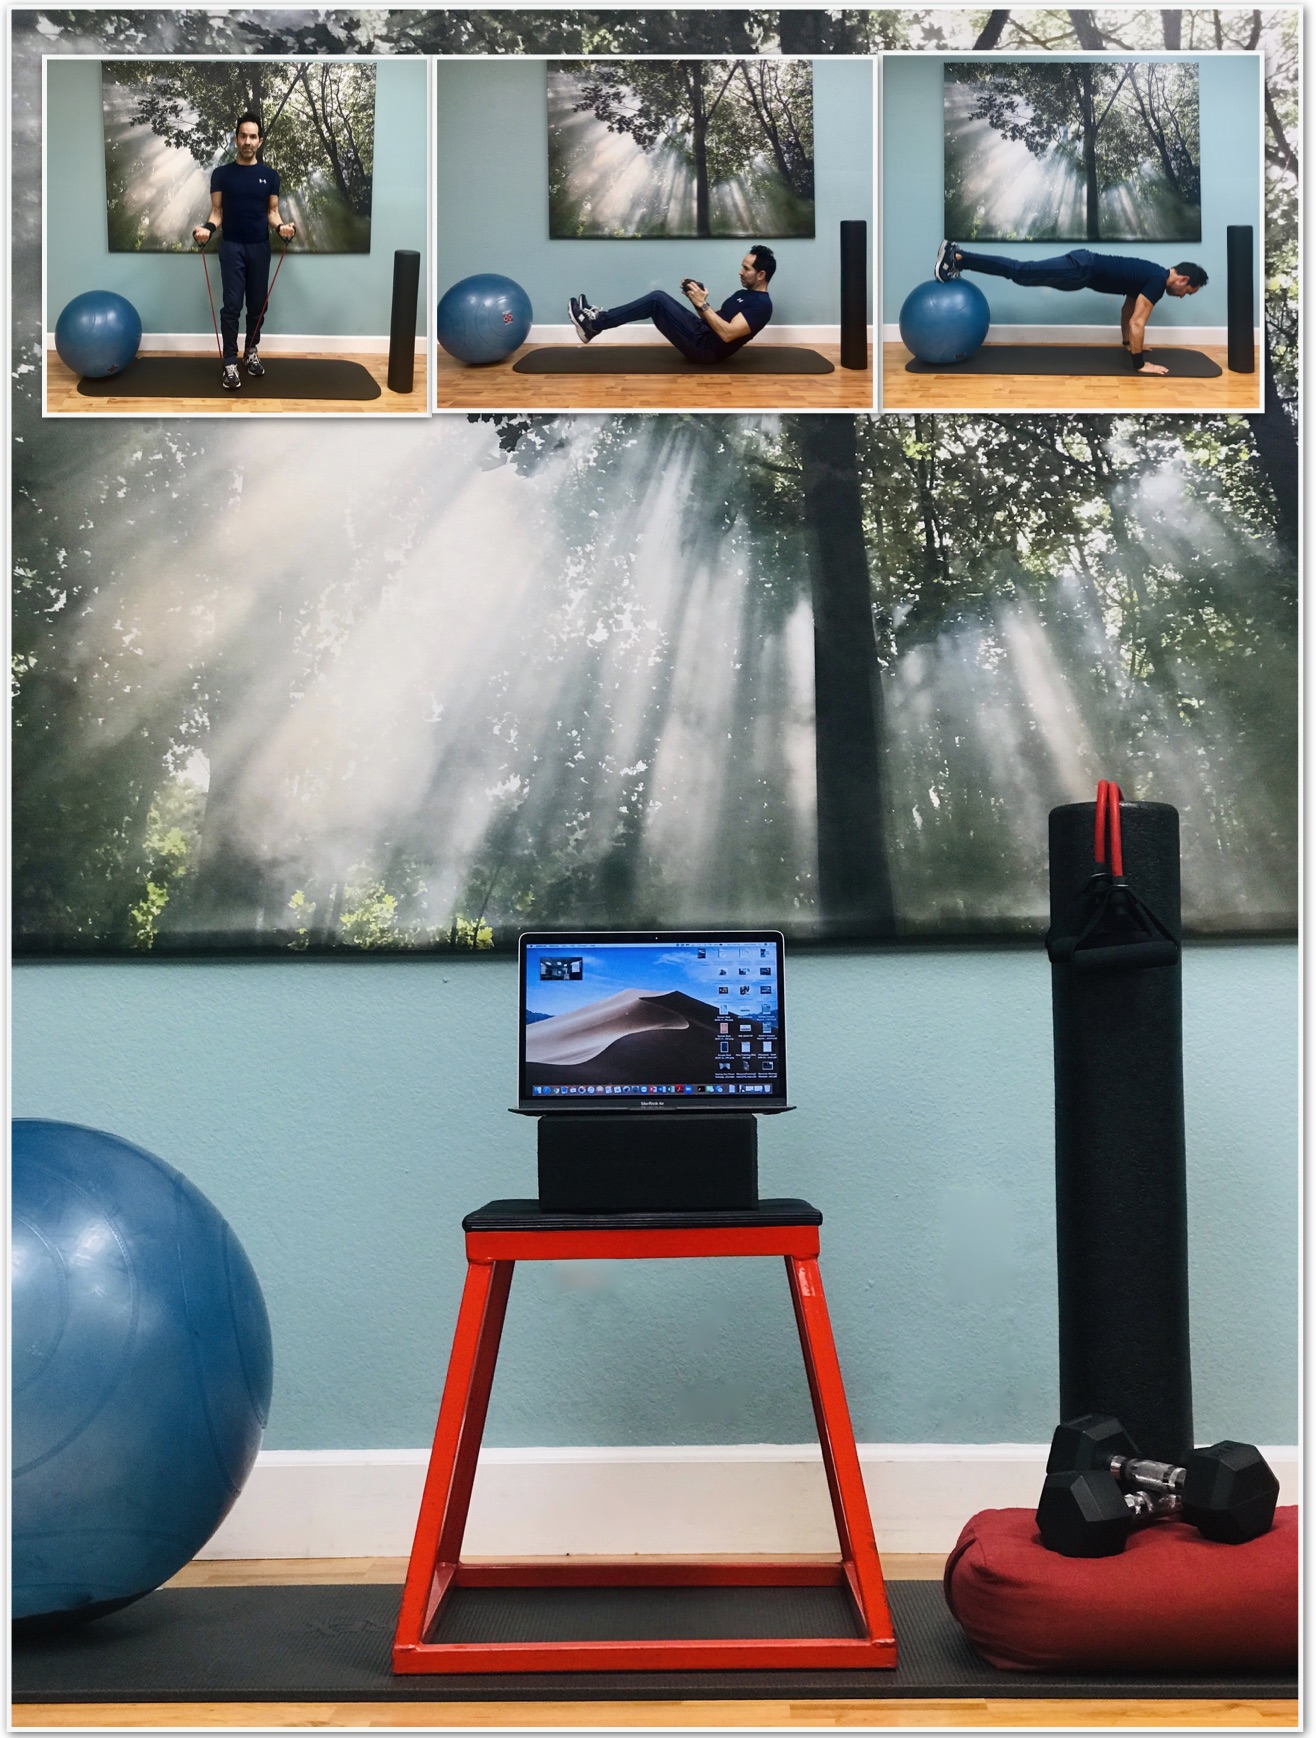 Personal training set-up for live virtual sessions. 